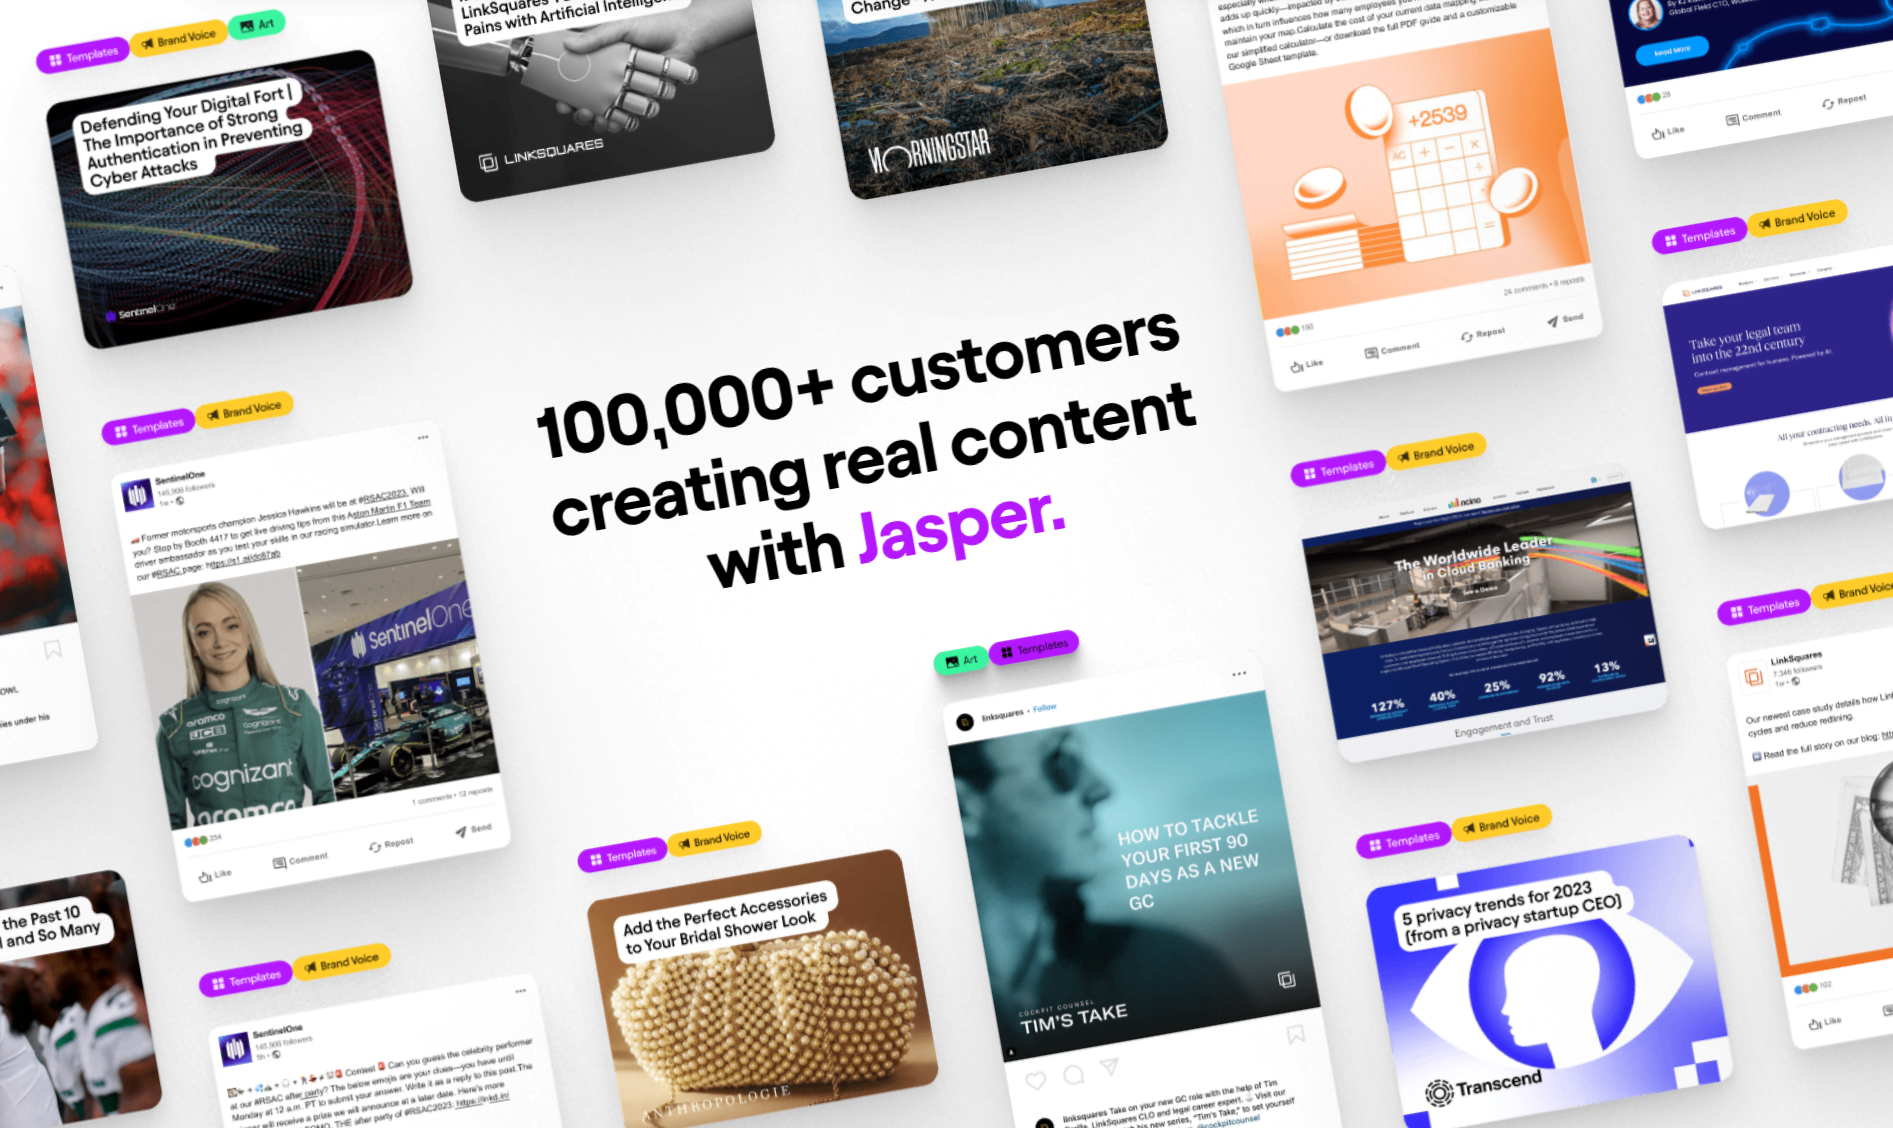 Jasper is an AI copywriting tool that launched before ChatGPT